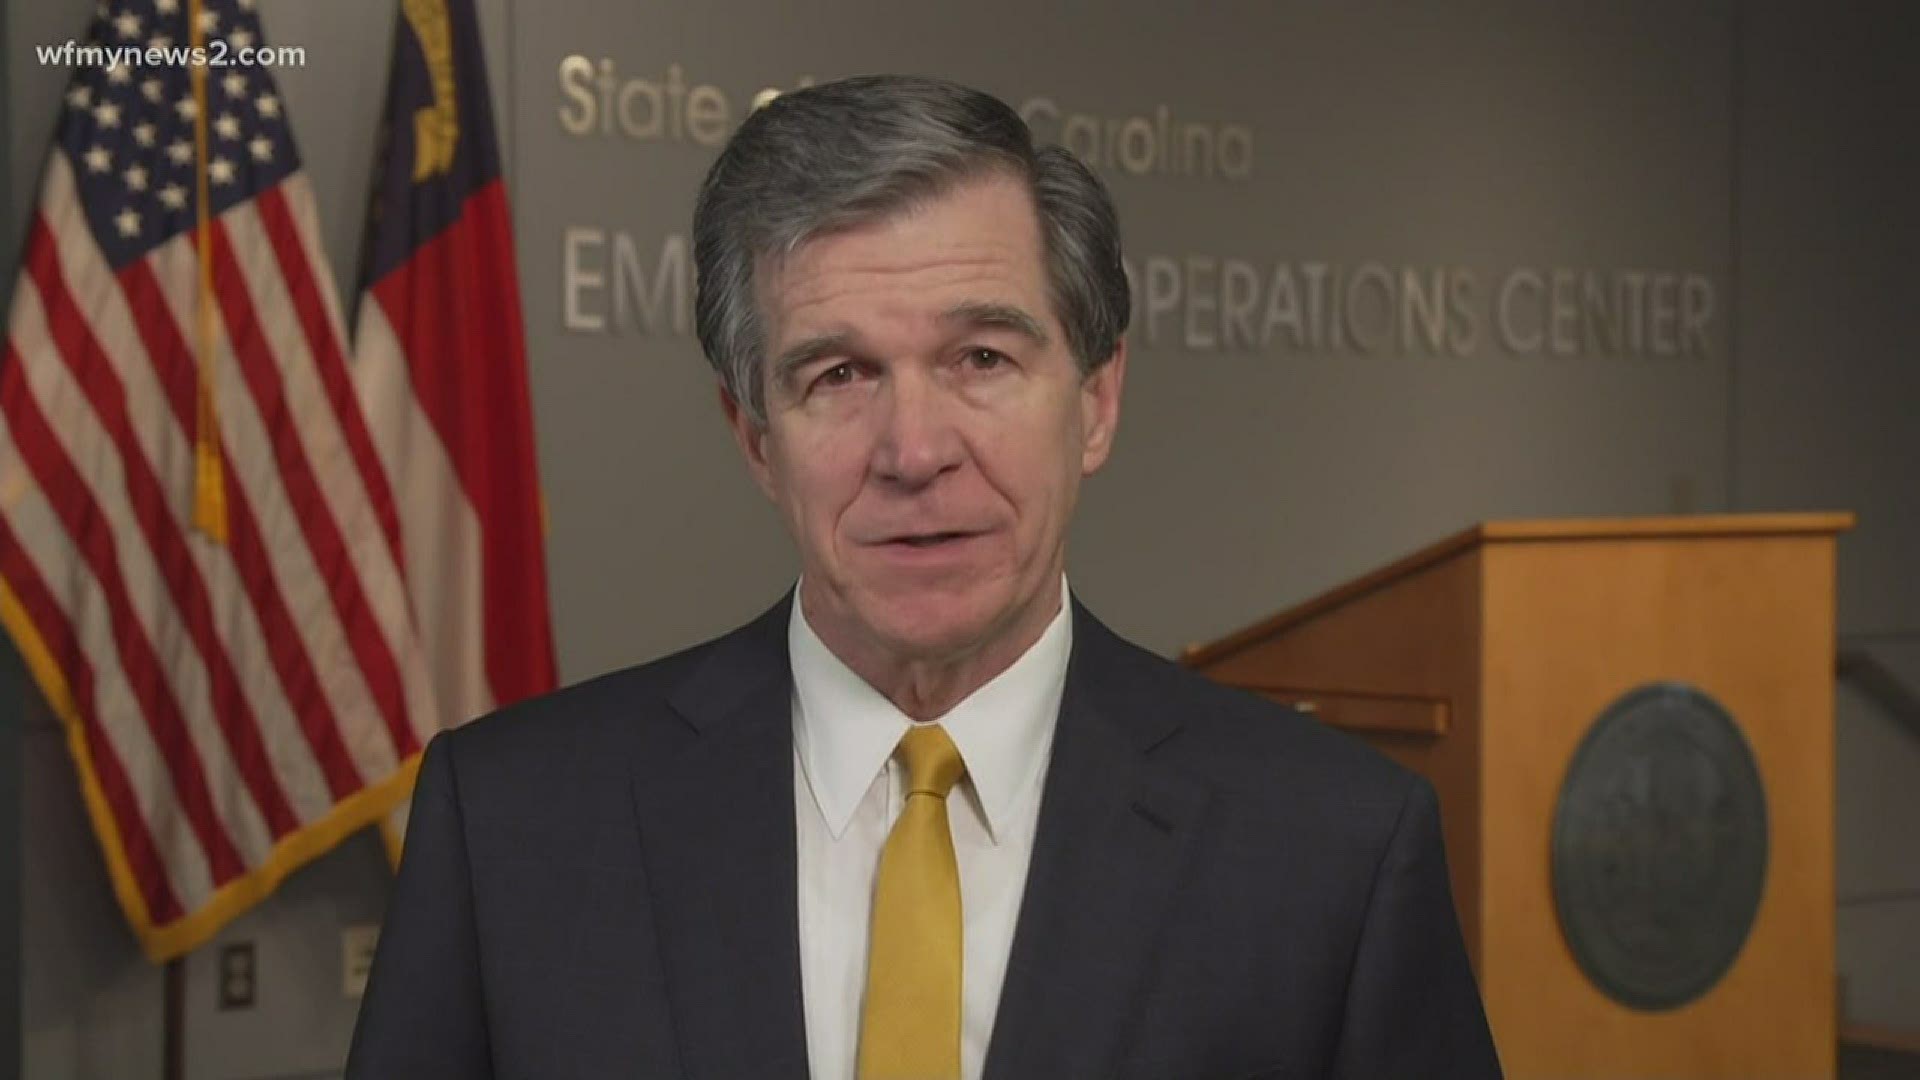 Governor Cooper said the focus of all plans is to move forward with care, not haste.